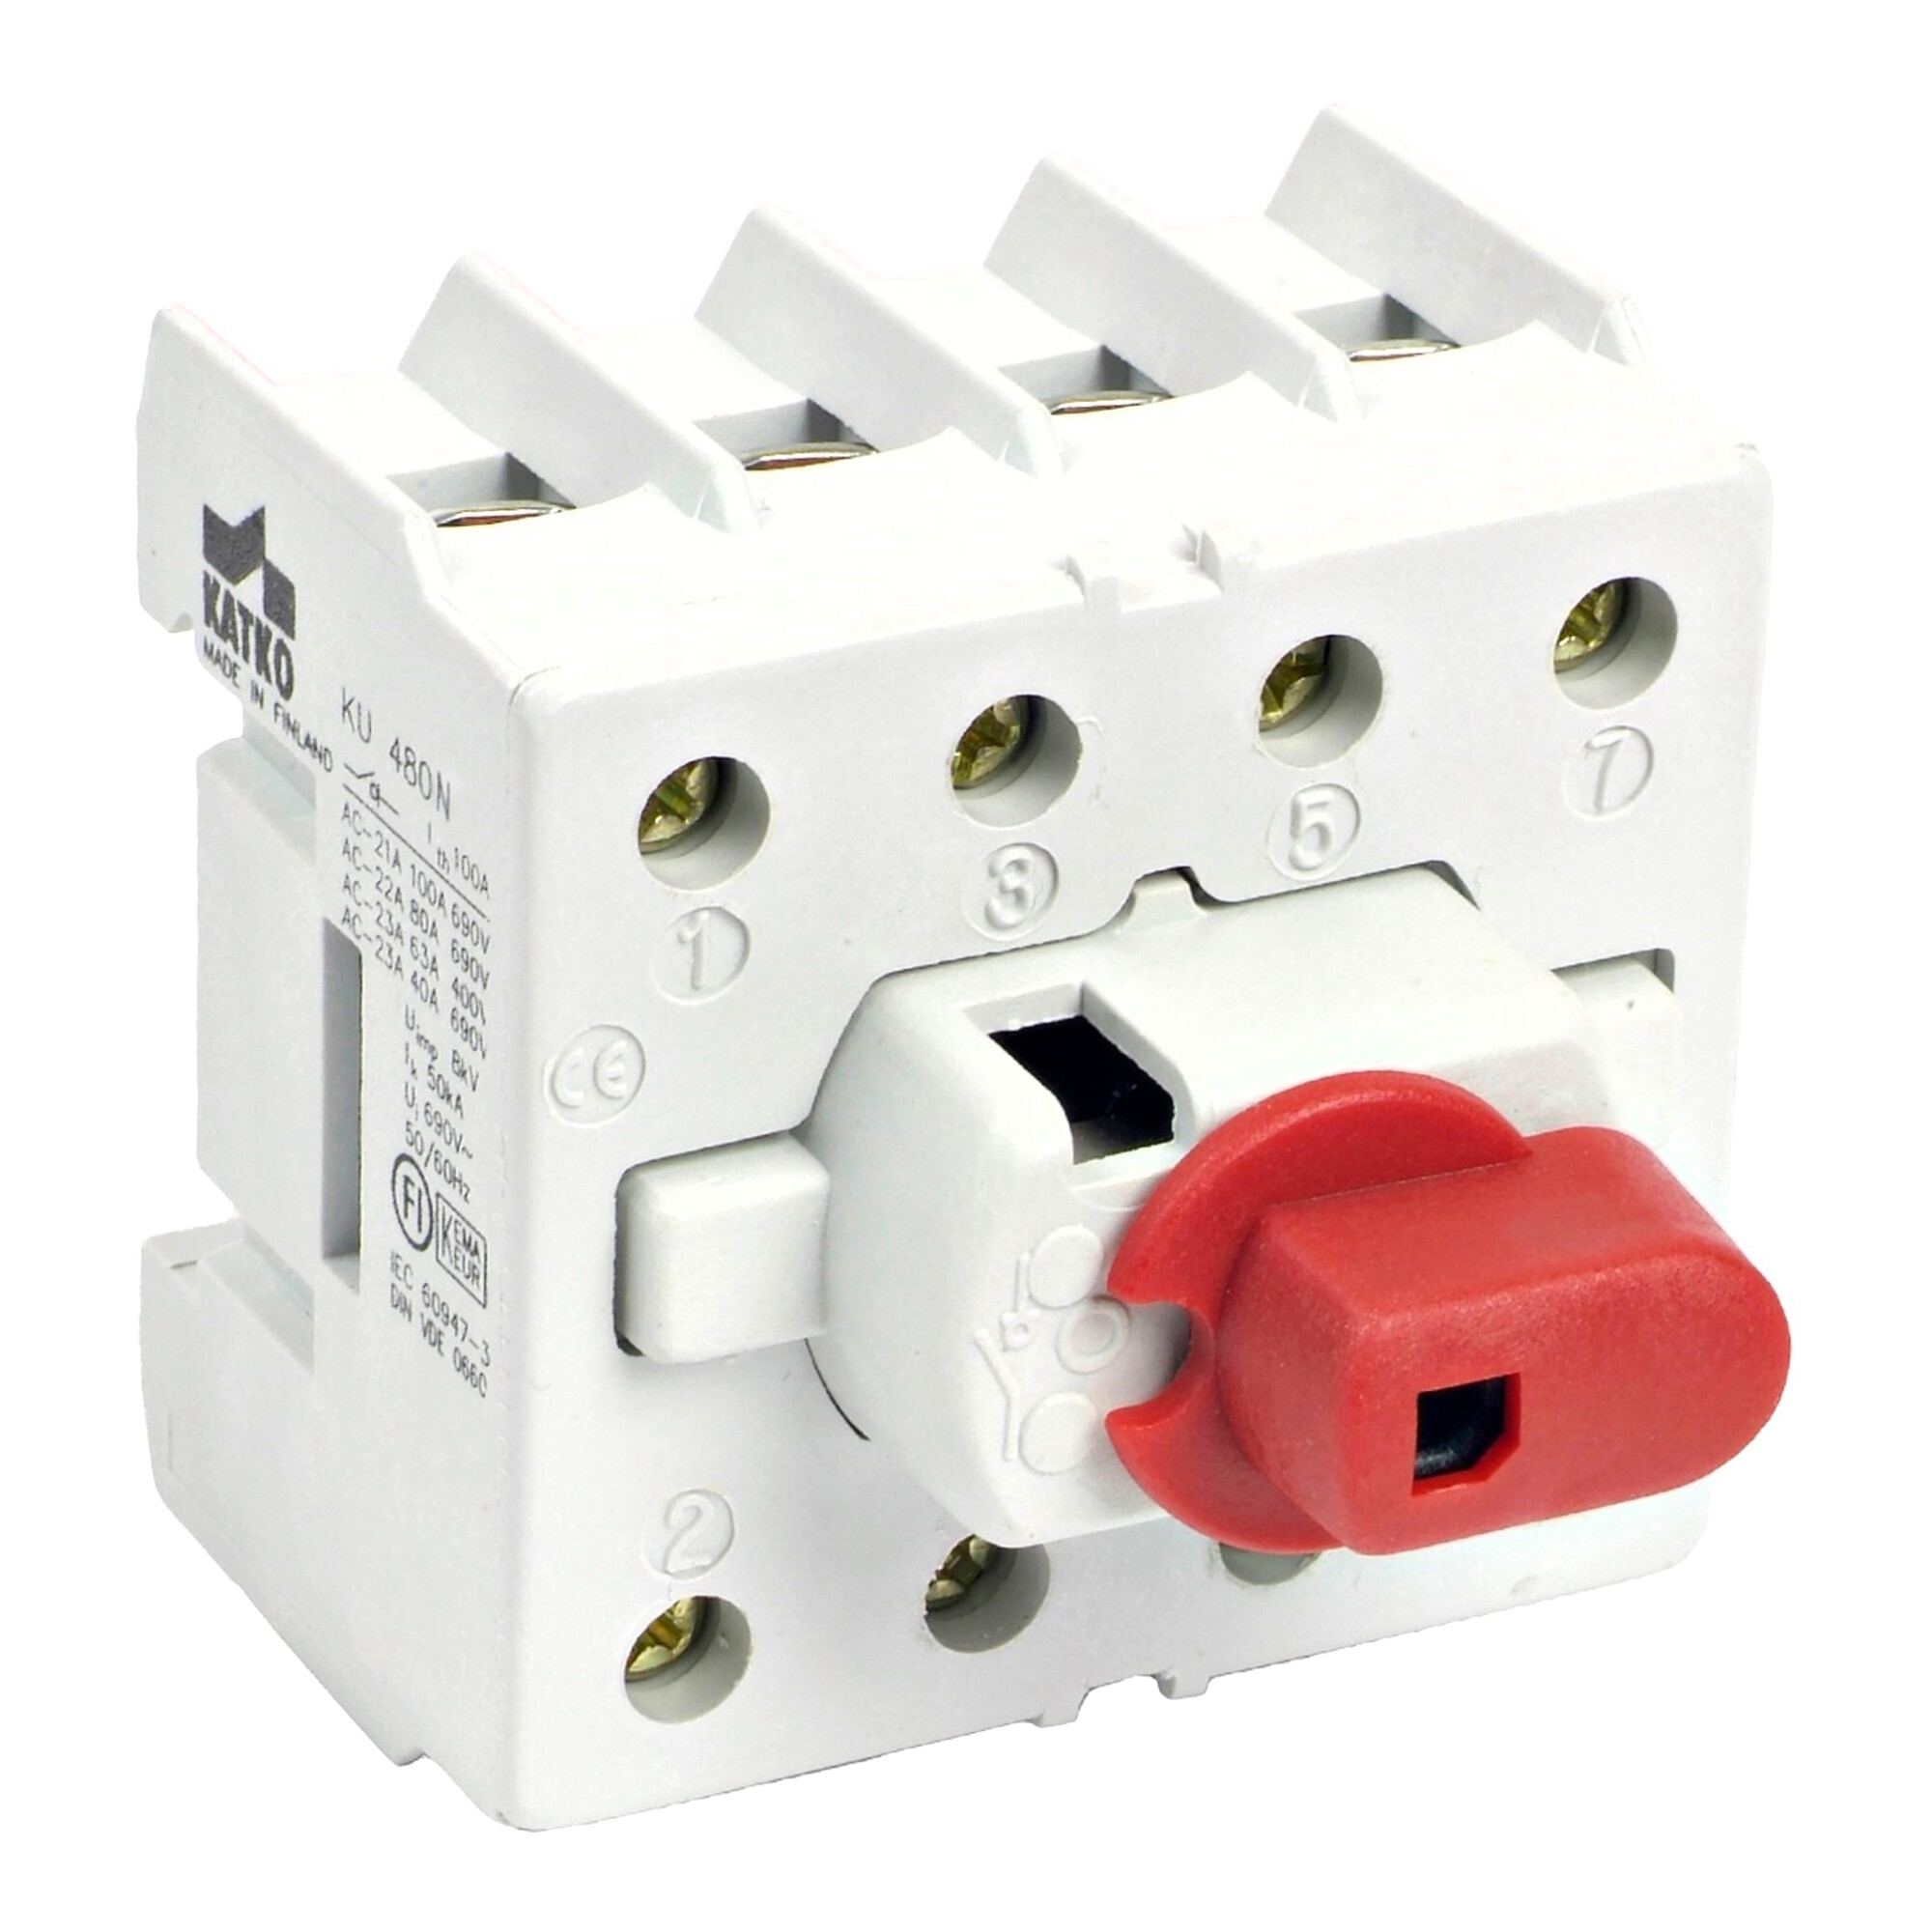 62-KU 416N KU-N 16-160A 3- and 4-pole IN/OUT, compact, suitable for DIN-EN rail. The 4-pole version is also available with early-make and late-break neutral pole. The silver contactsensures safe and durable operation. Series KU modular design.